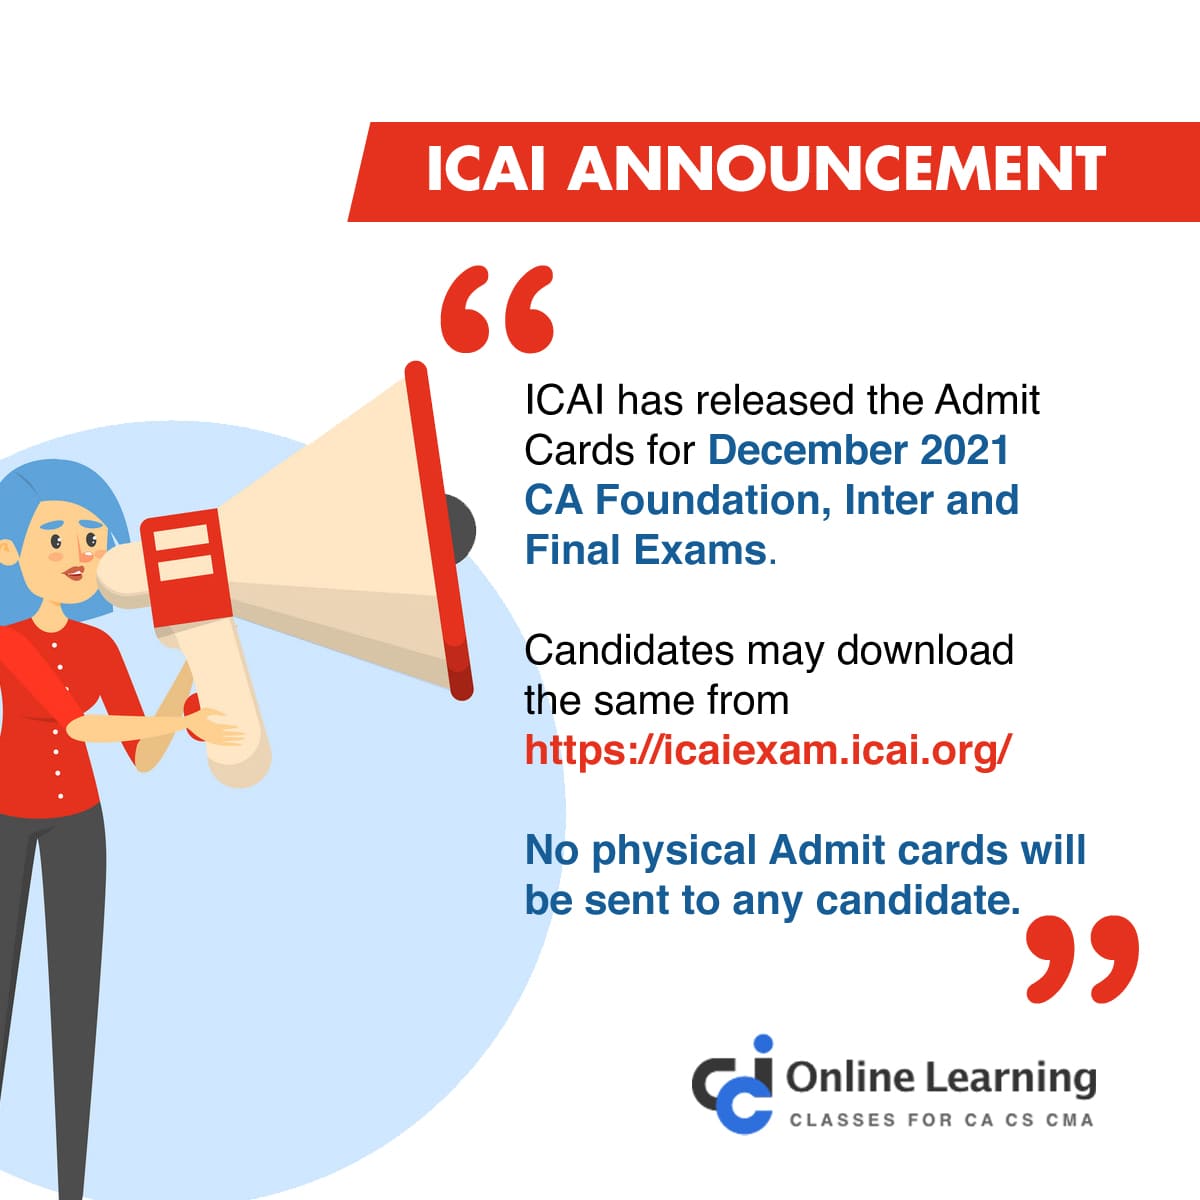 Admit Cards for December 2021 CA Exams Released